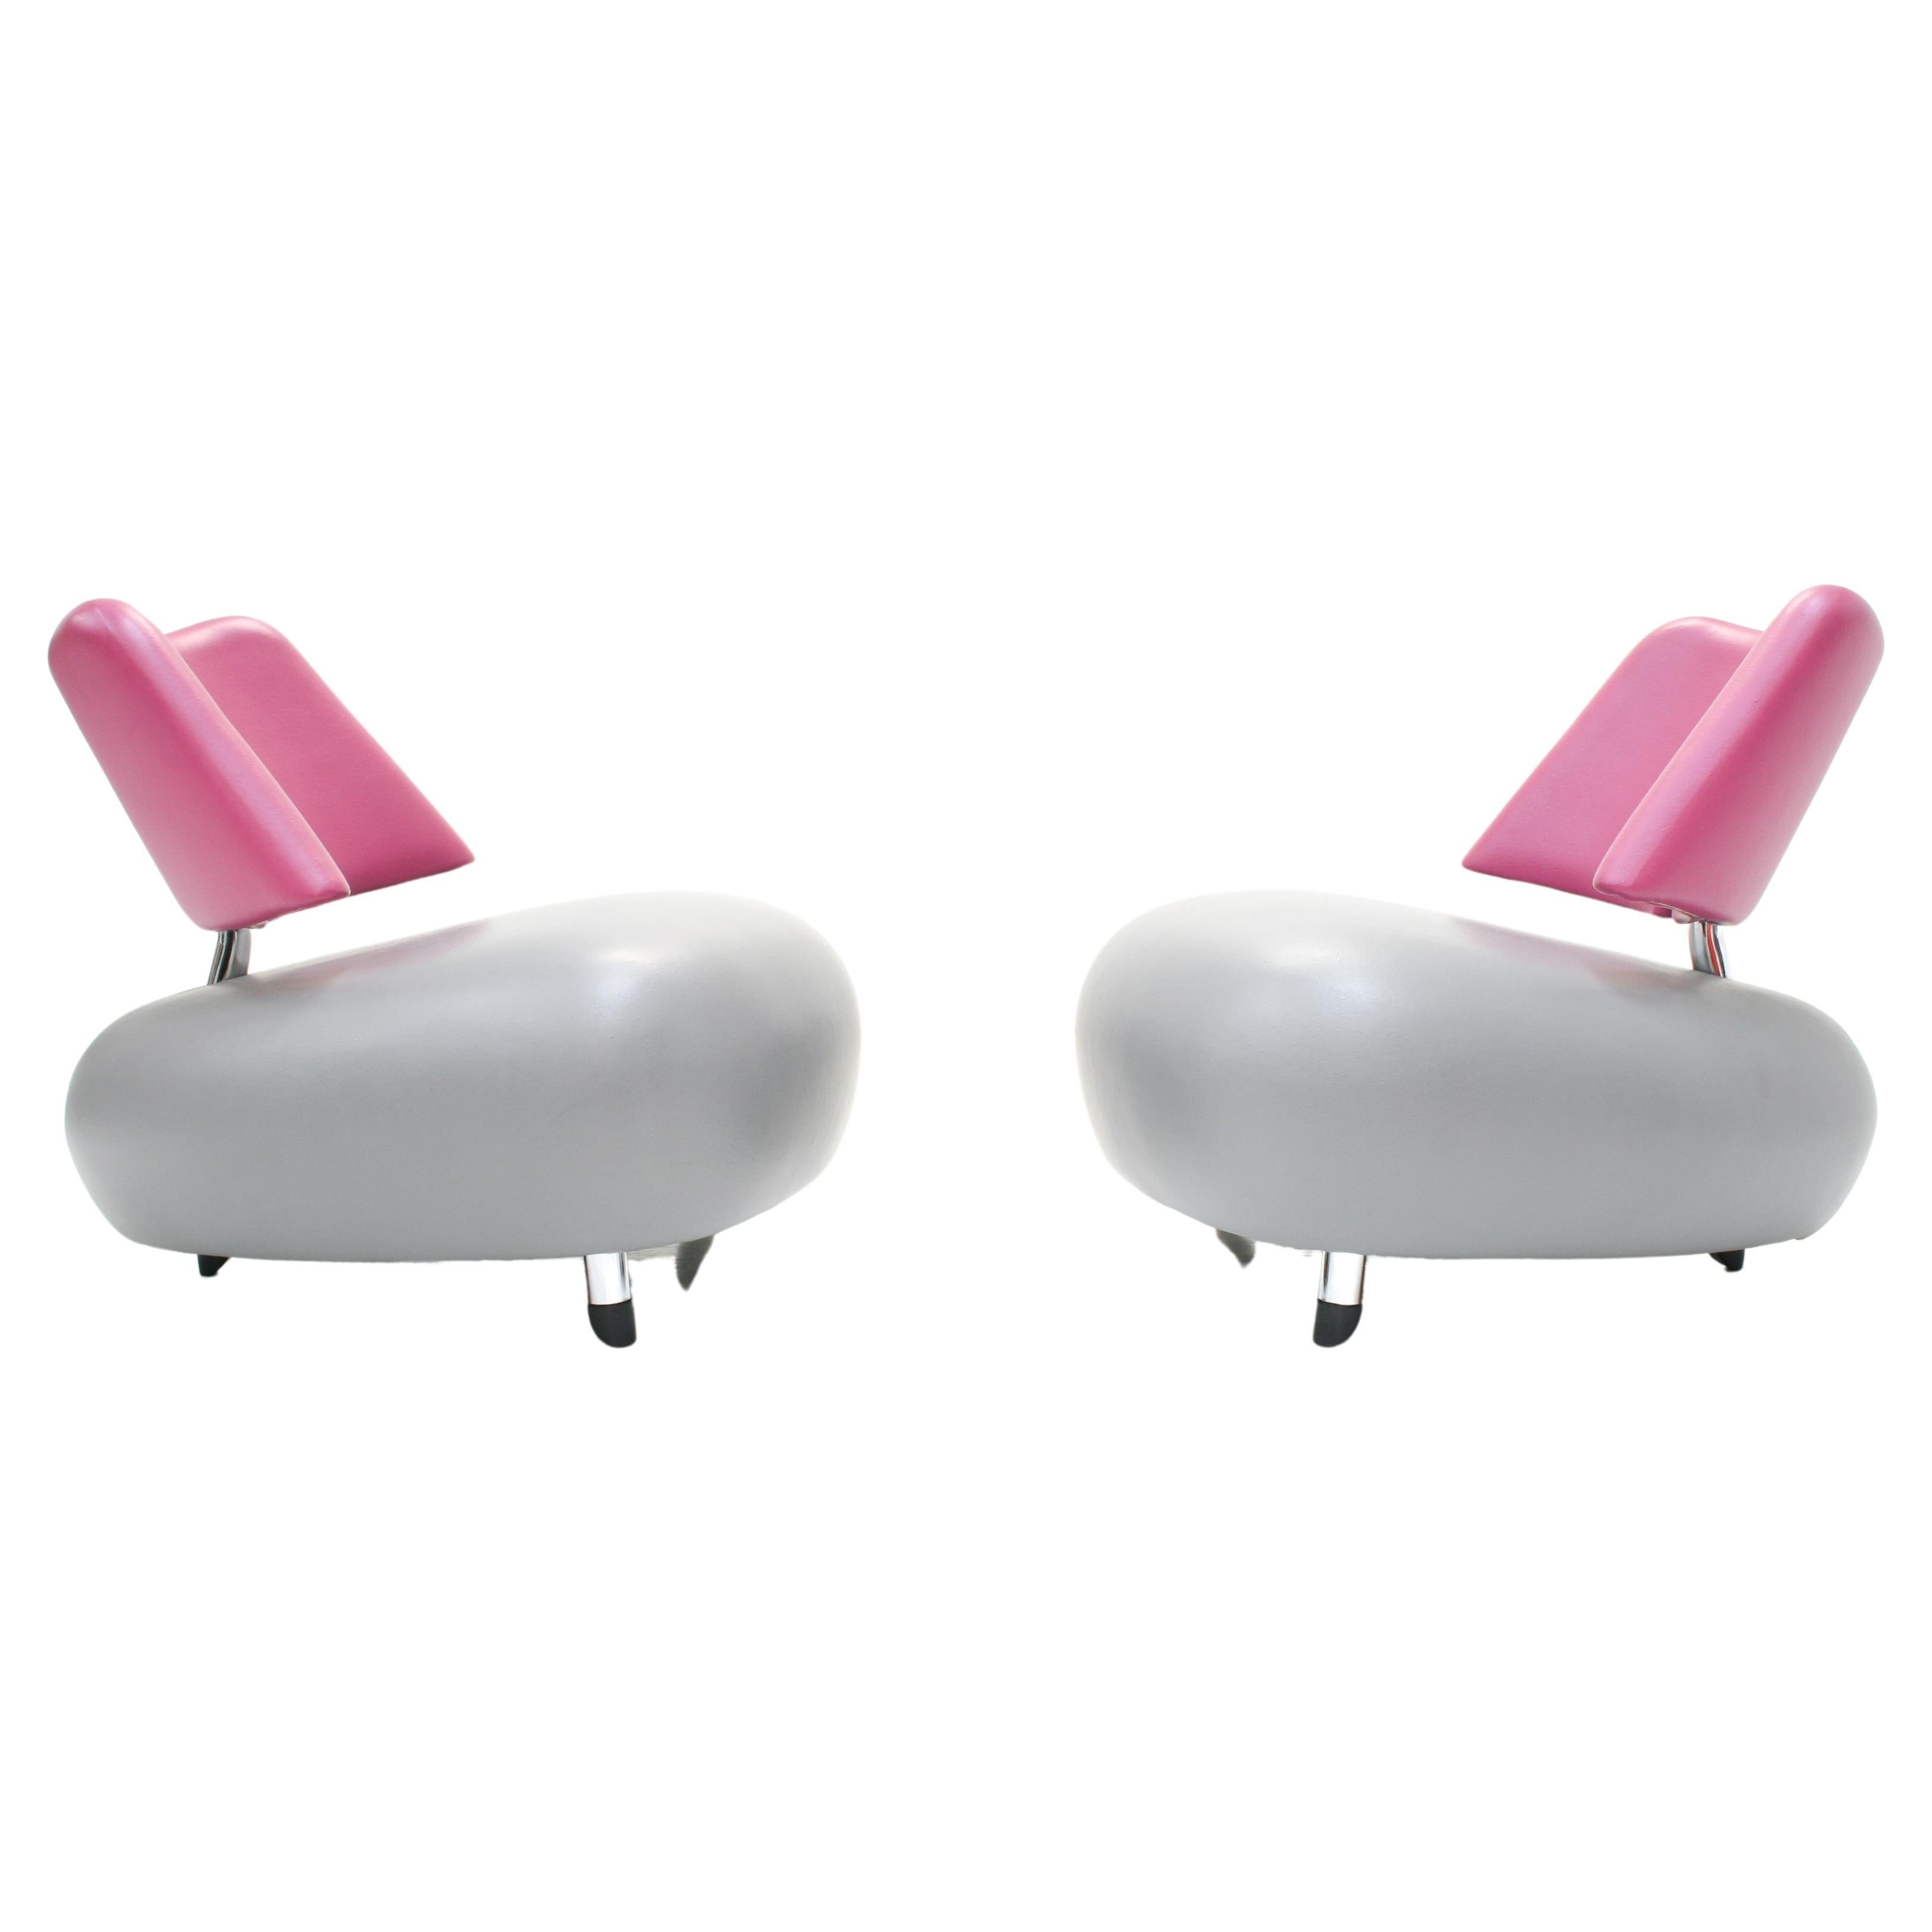 1980s Rubber Pallone Pa Lounge Chairs by Roy De Scheemaker for Leolux, Set of 2